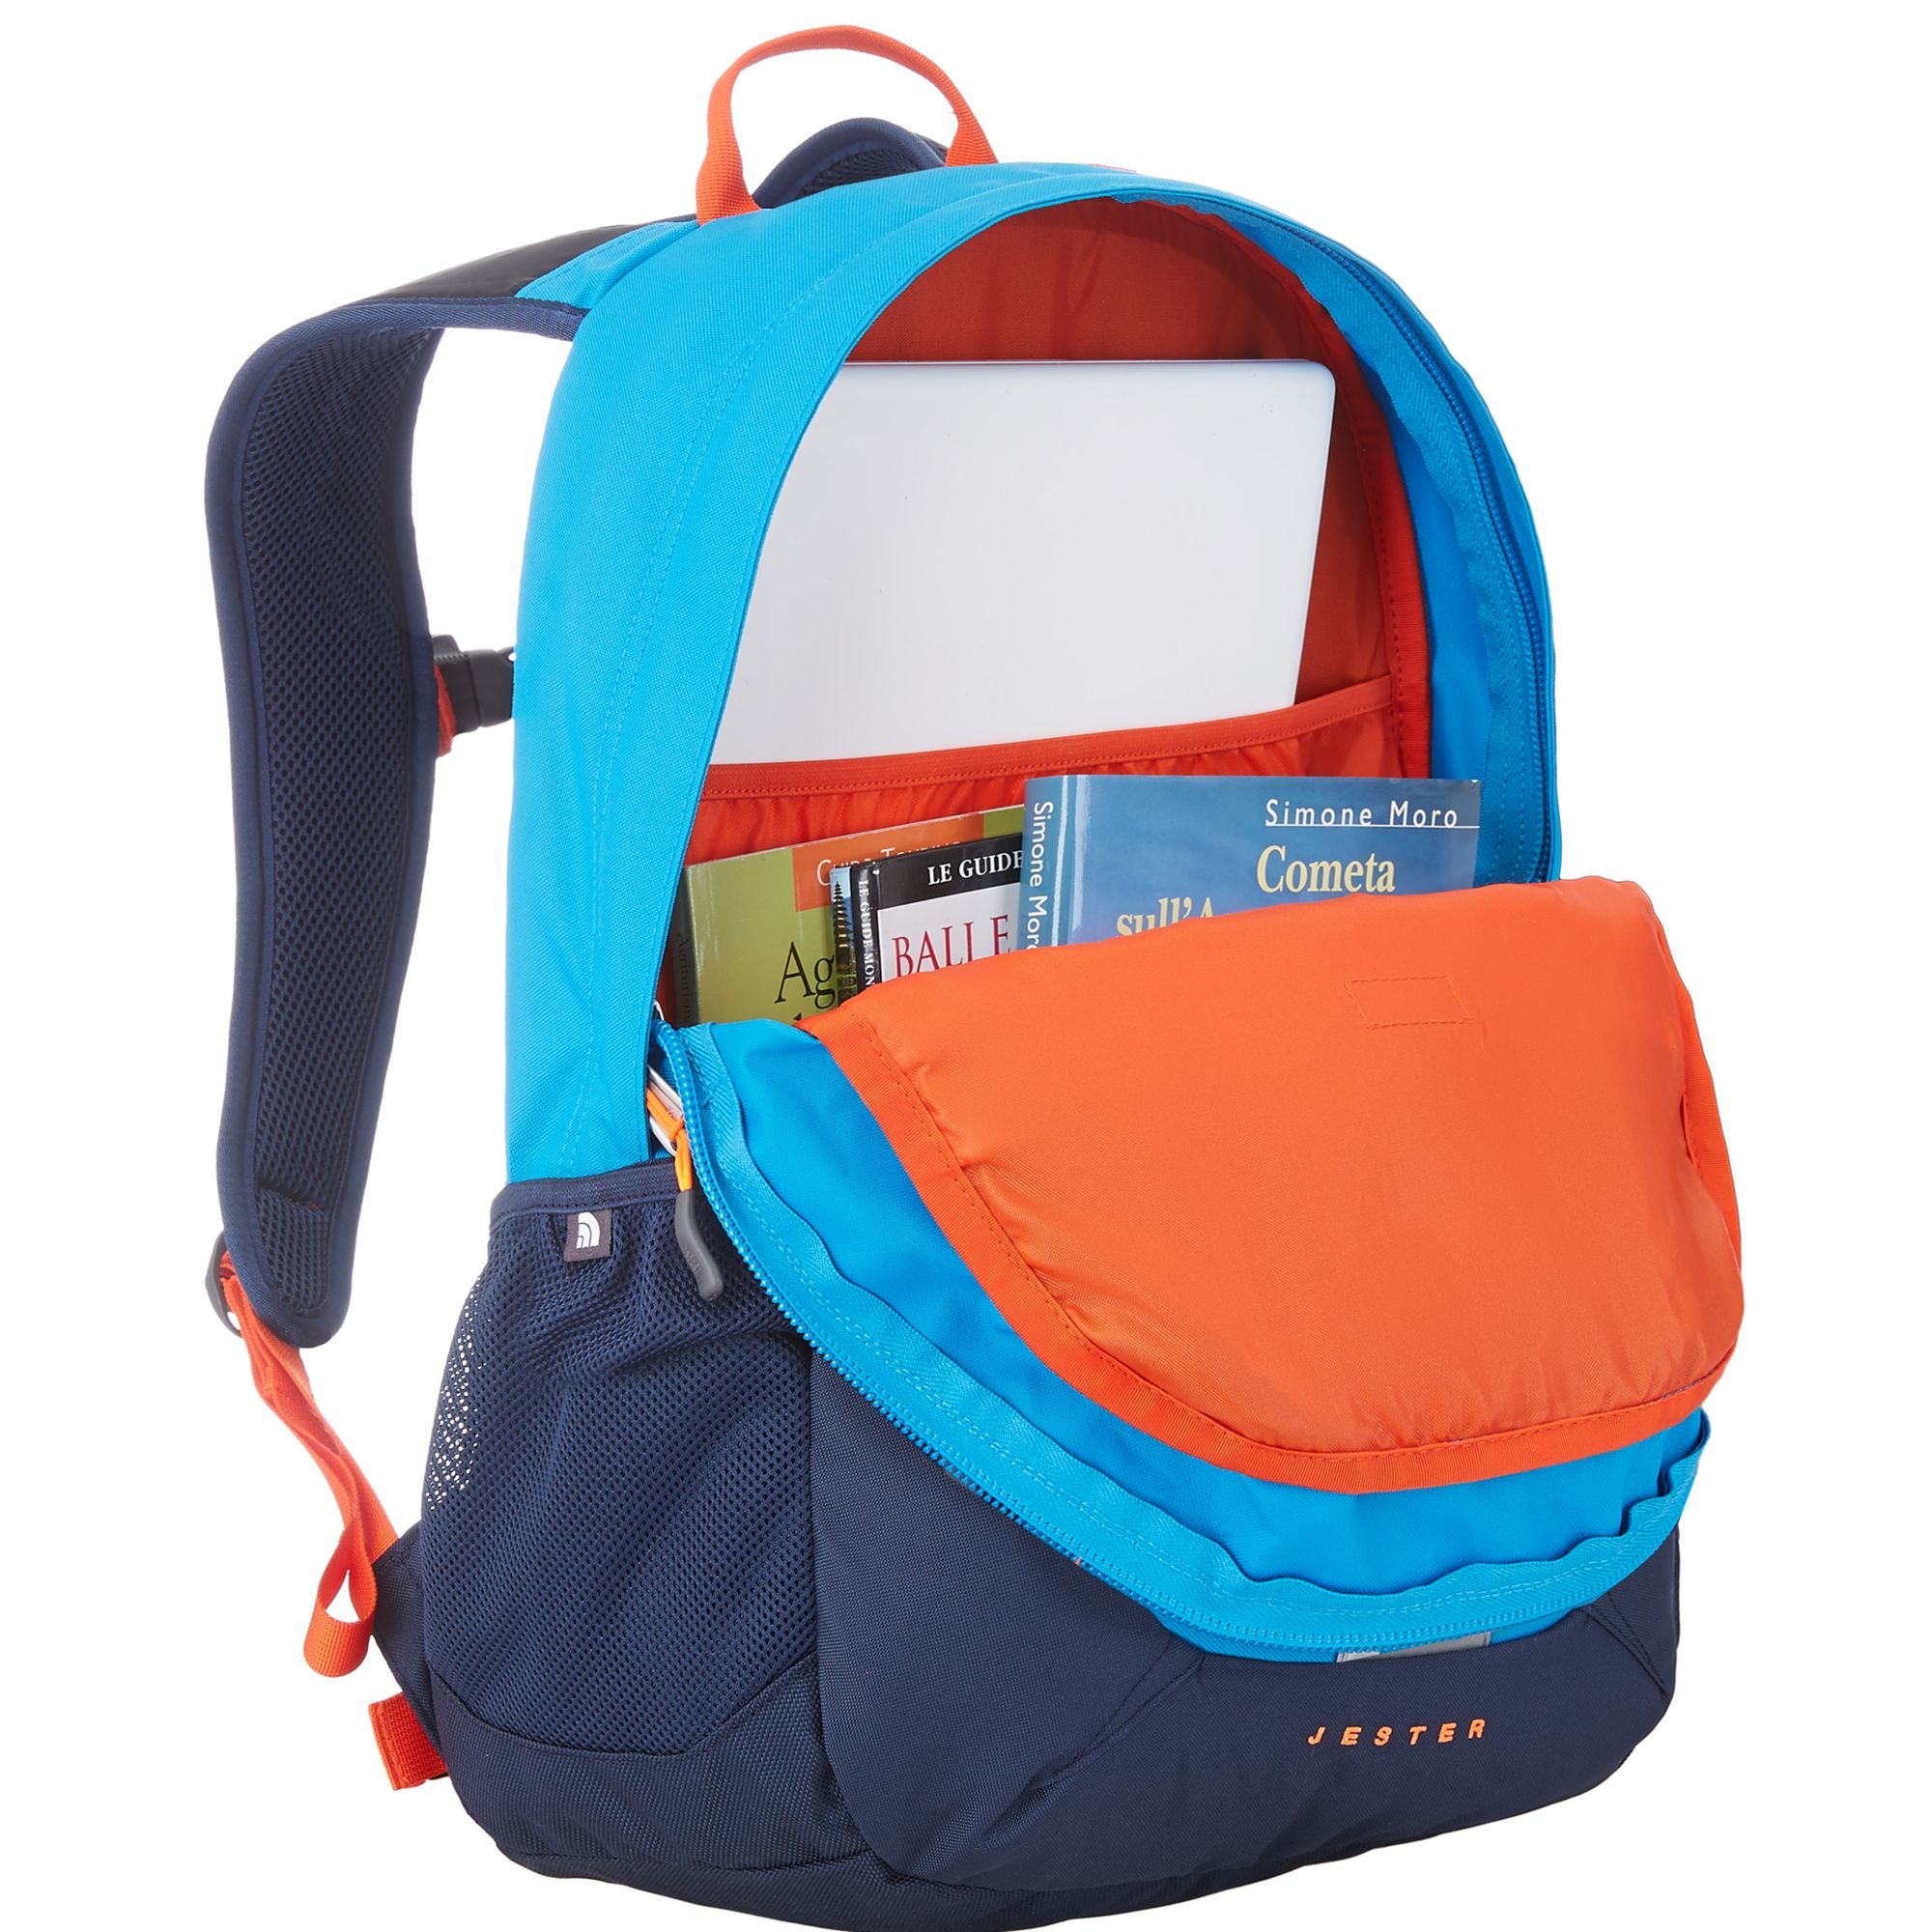 north face backpack blue and orange